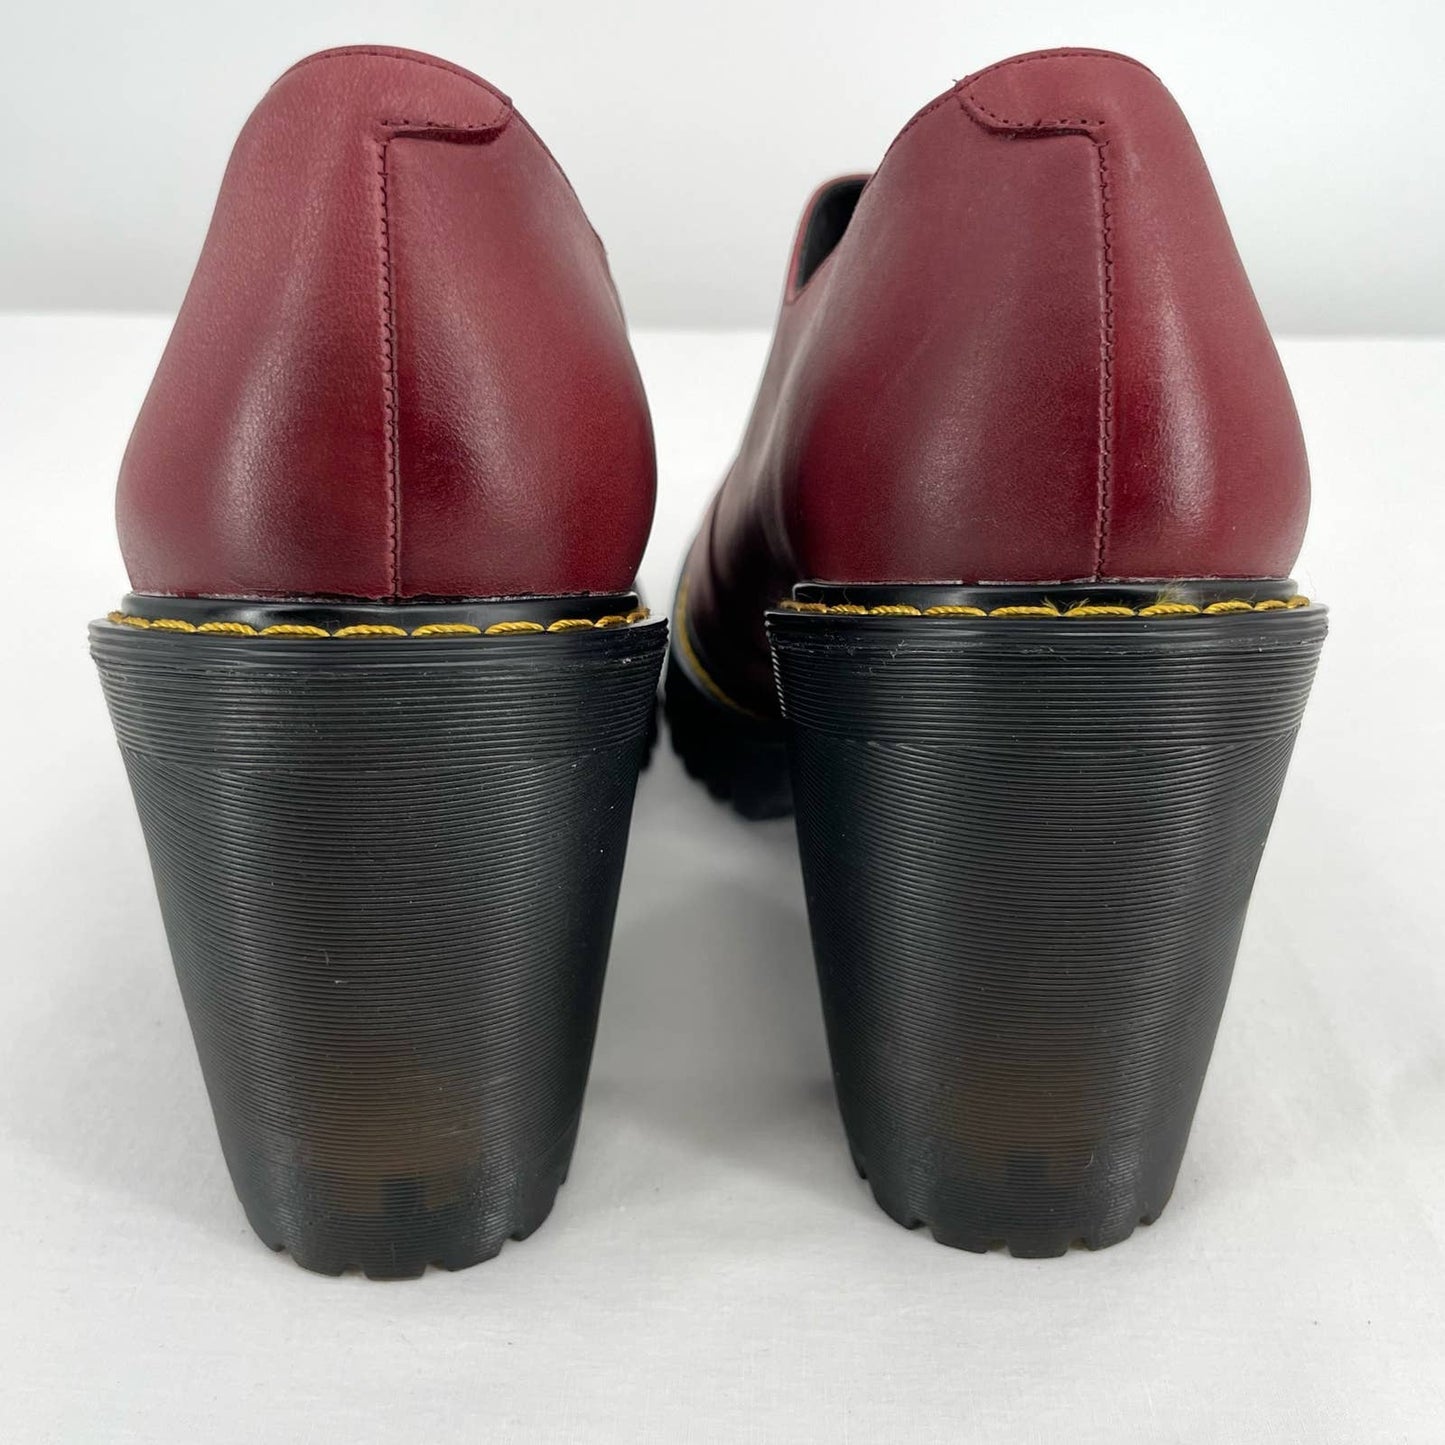 Dr. Martens Cordelia Wine Red Maroon Leather Chunky High Heeled Pumps Shoes Size 11